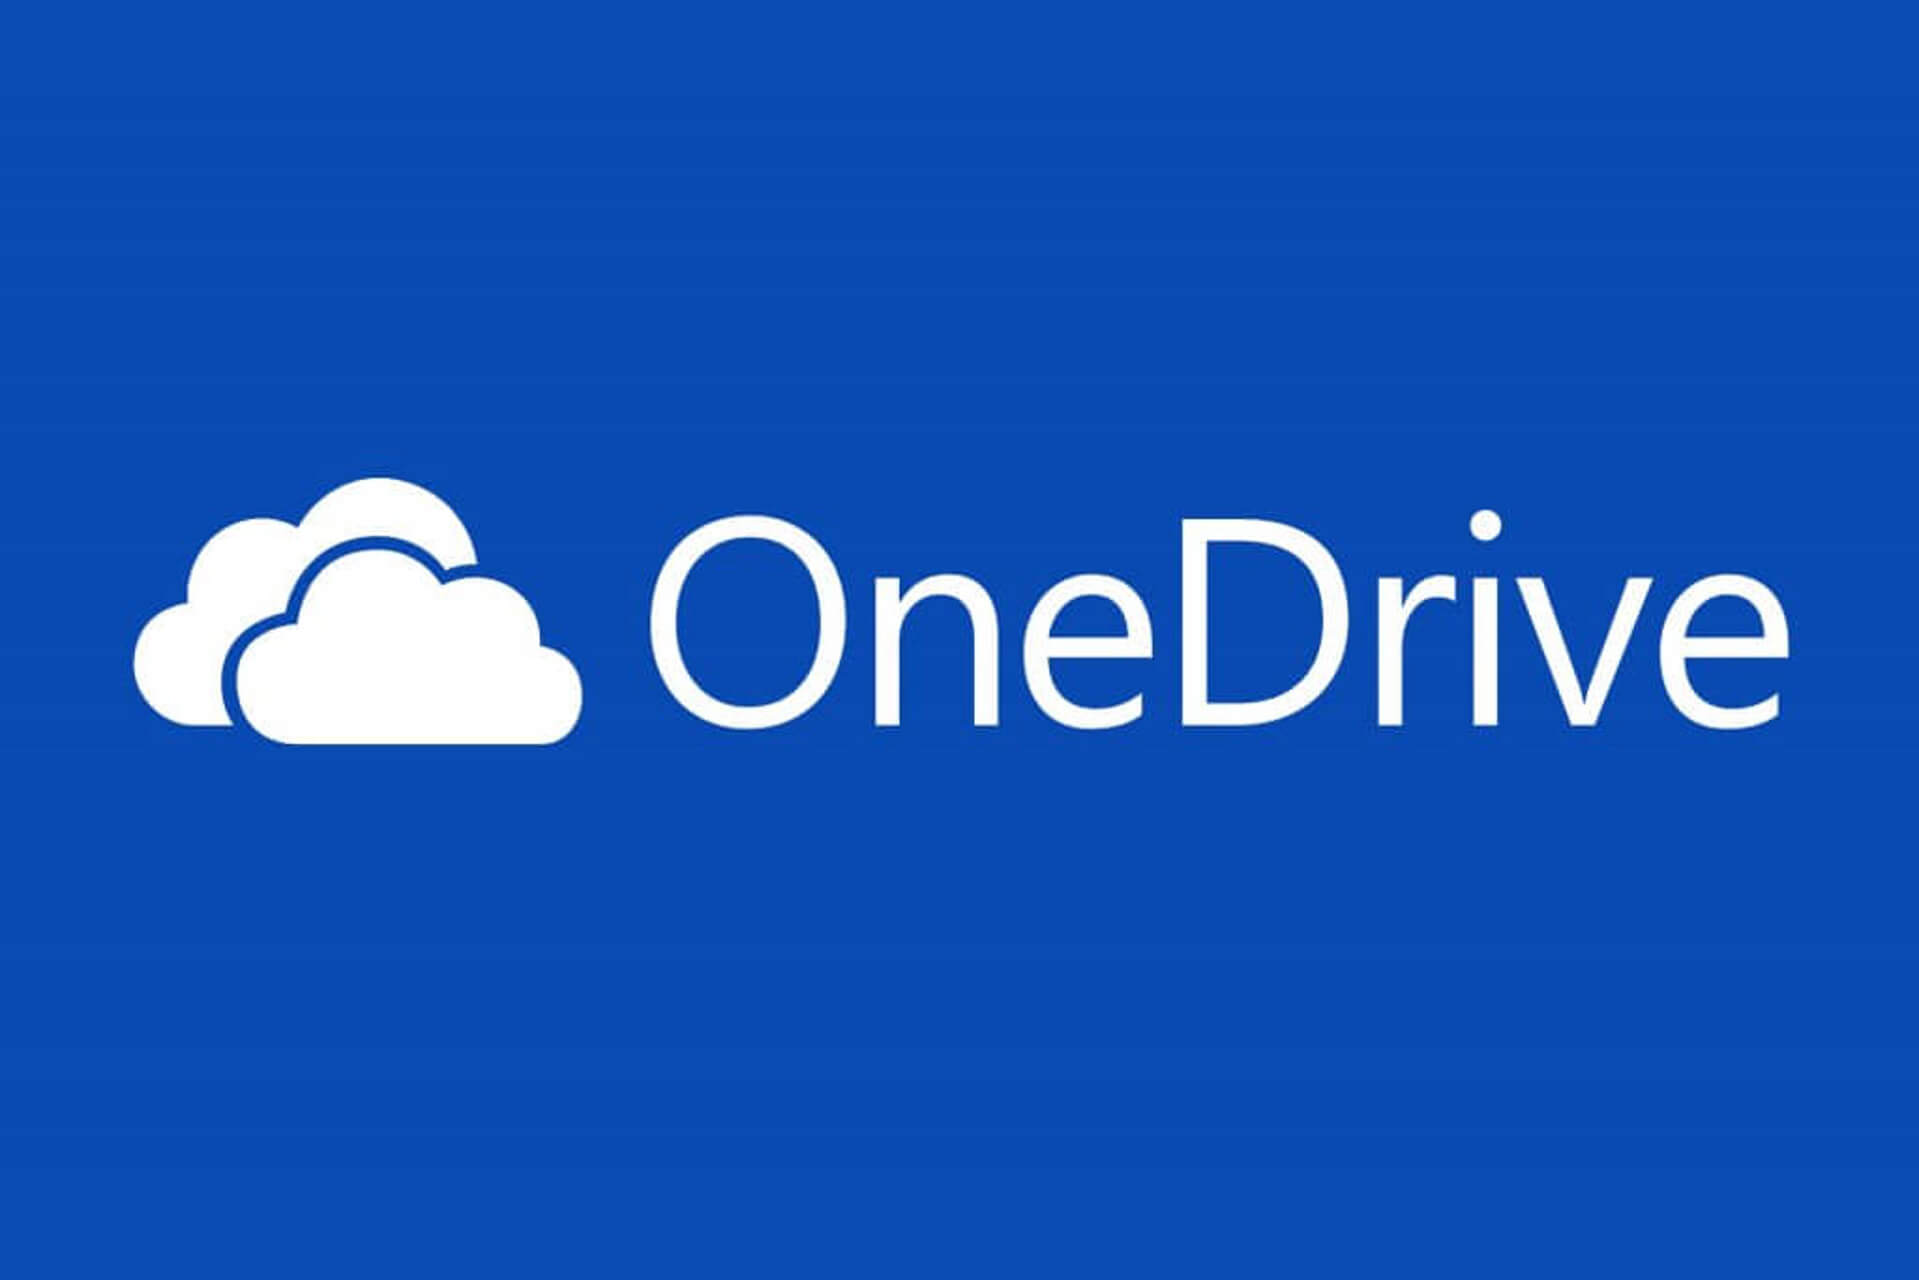 onedrive constantly syncing